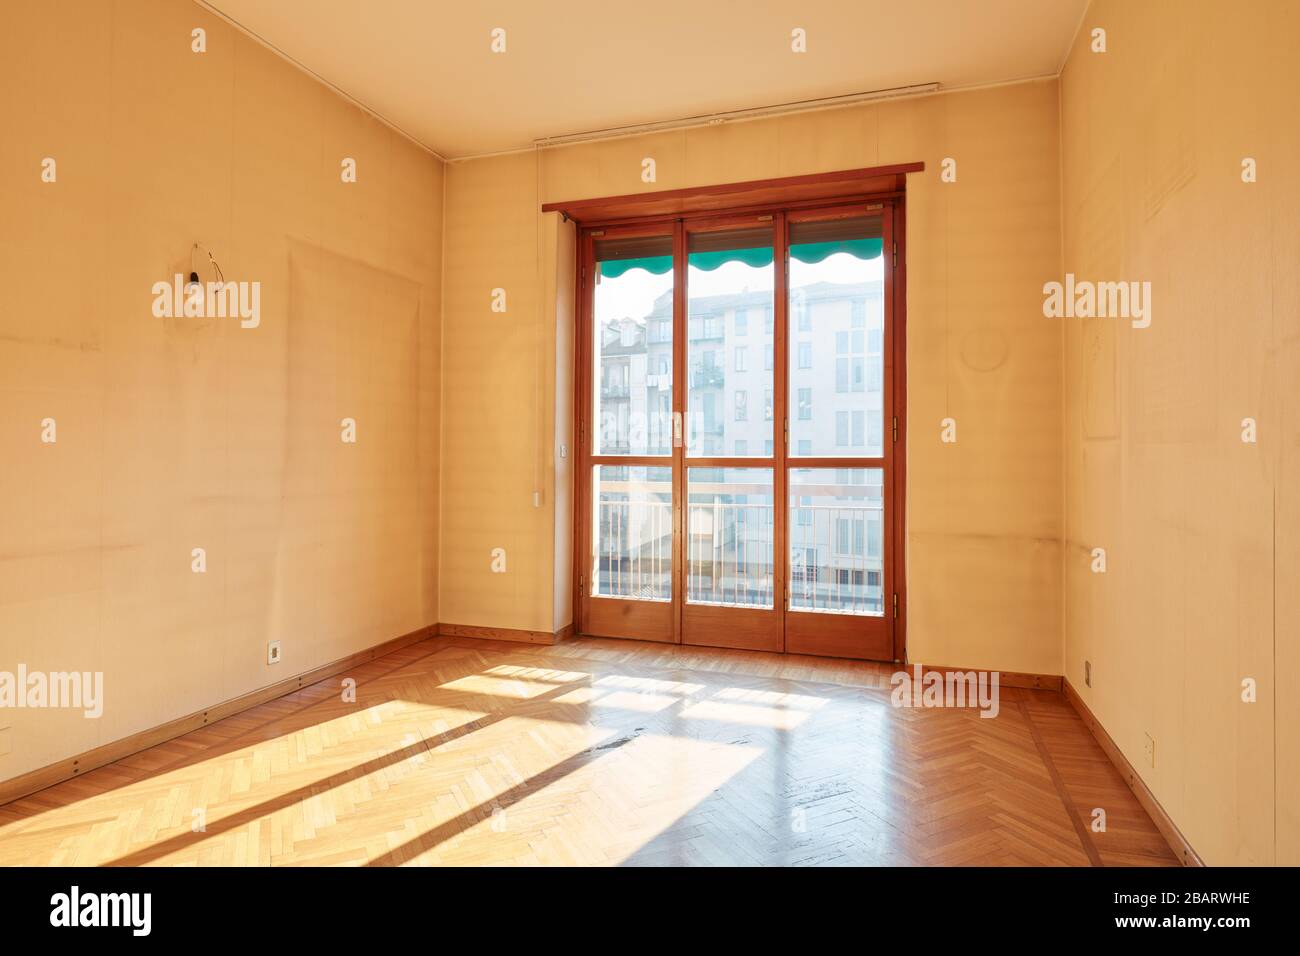 Sunny room with wooden floor in old apartment interior Stock Photo